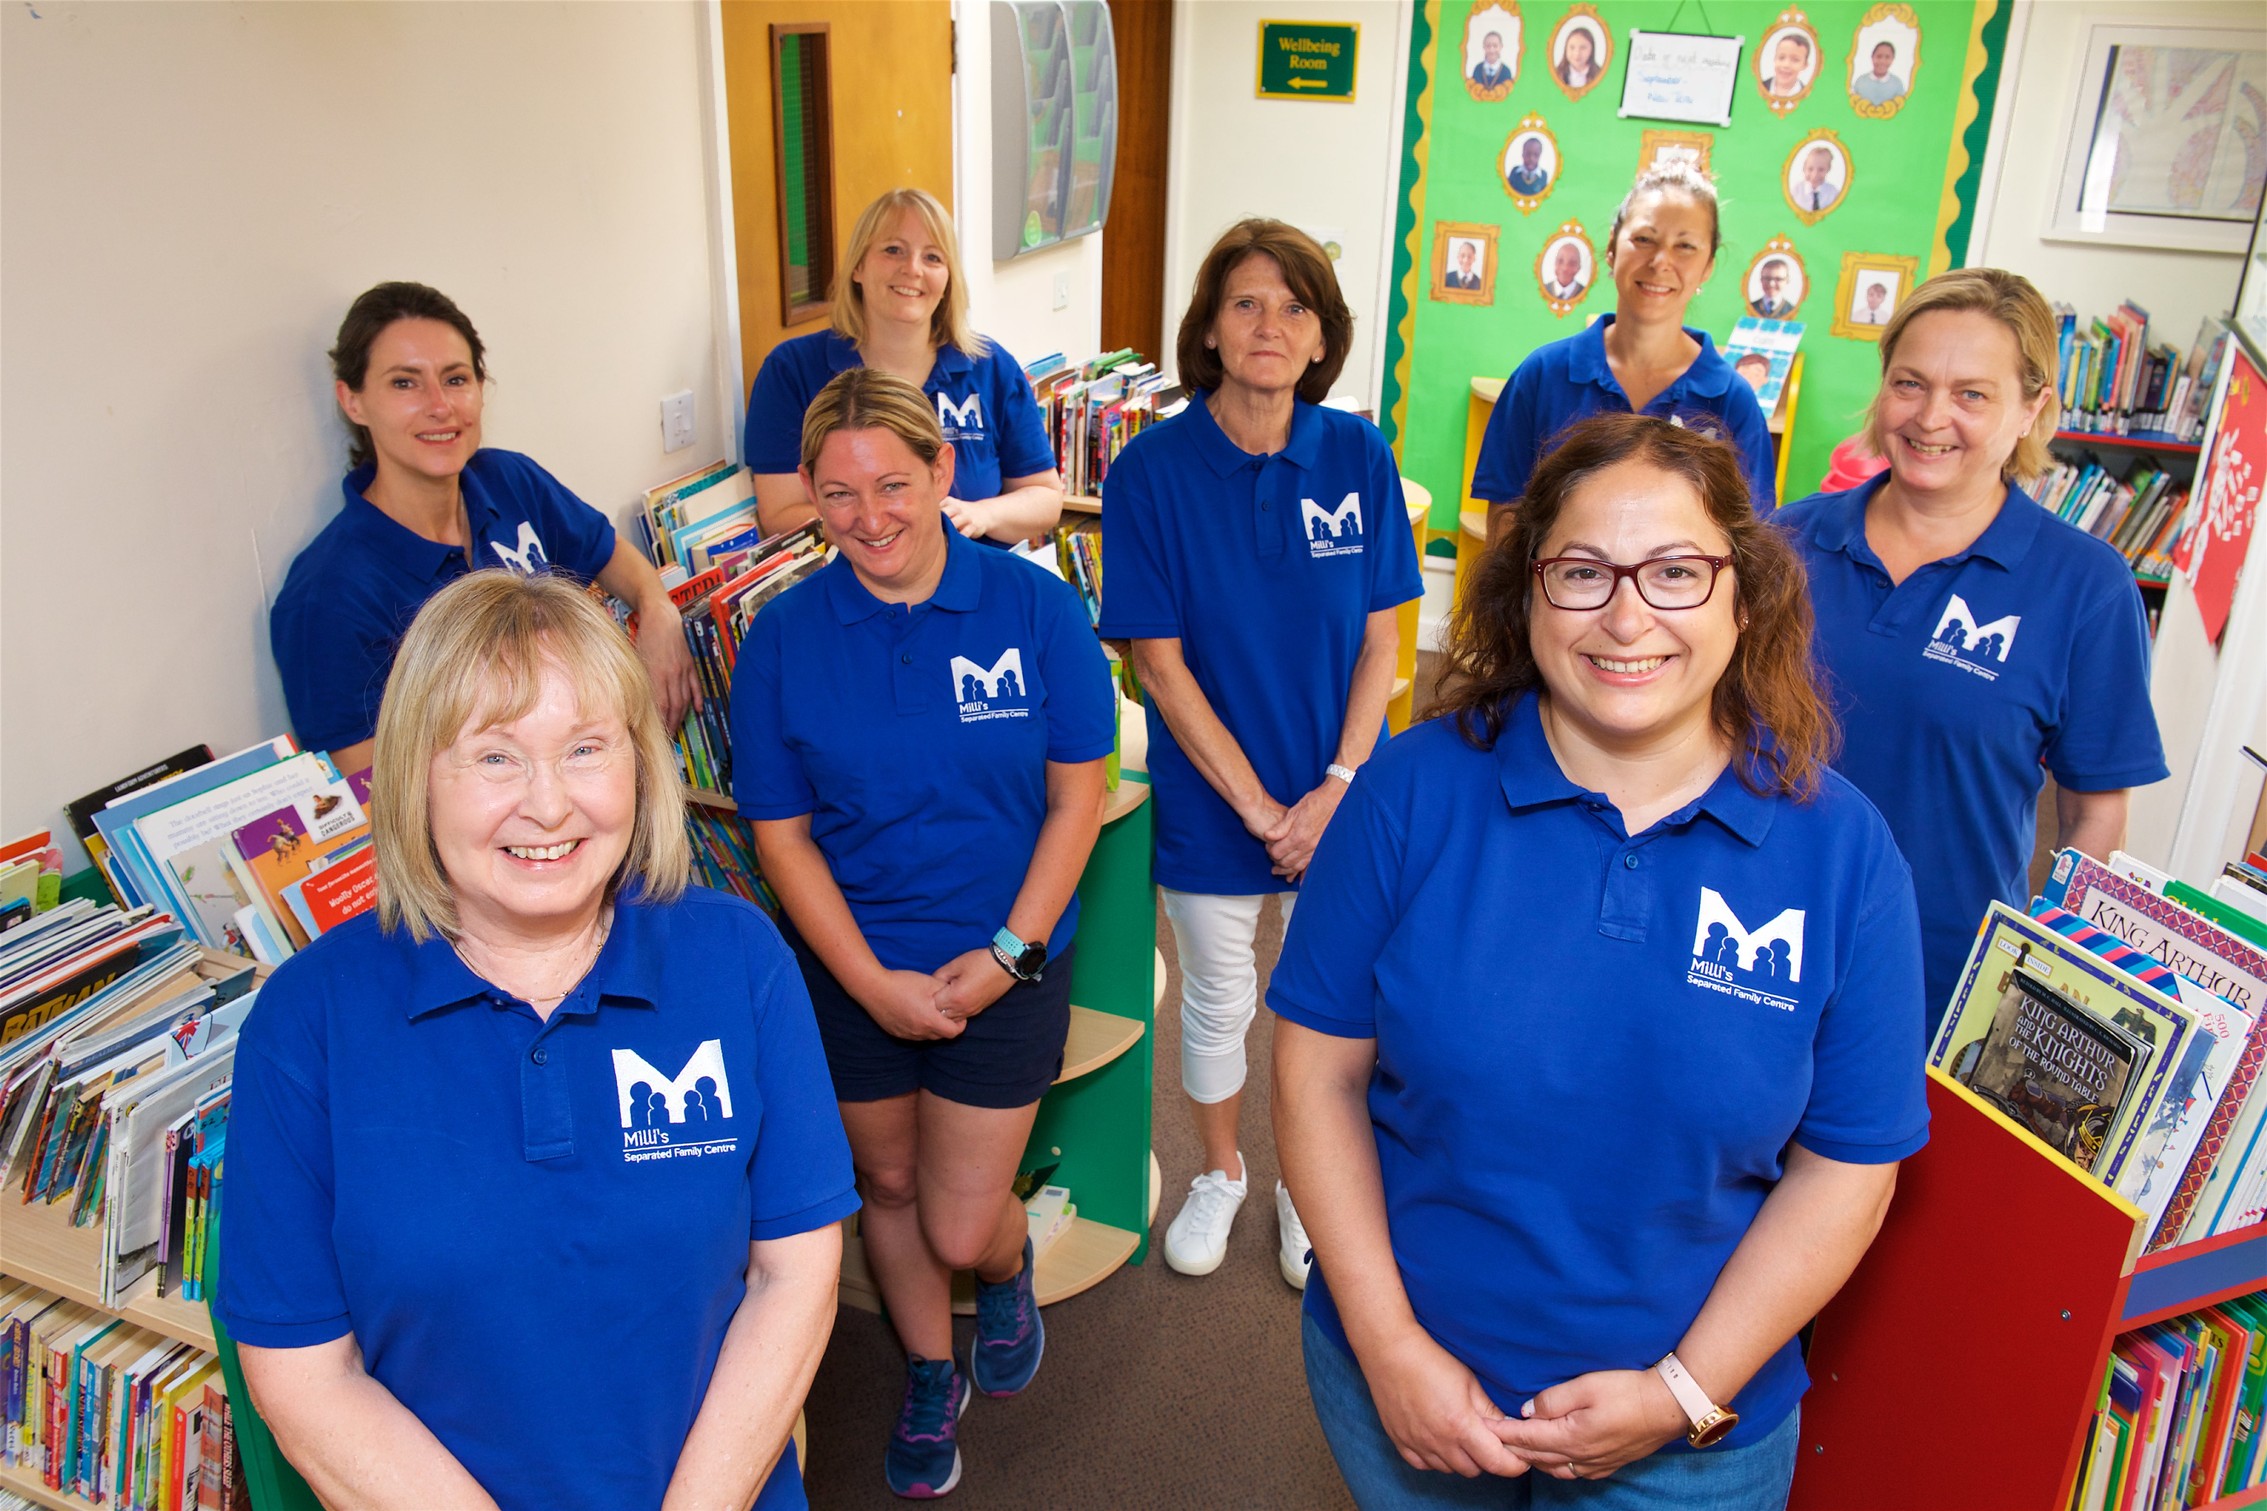 Milli’s Separated Family Centre volunteers